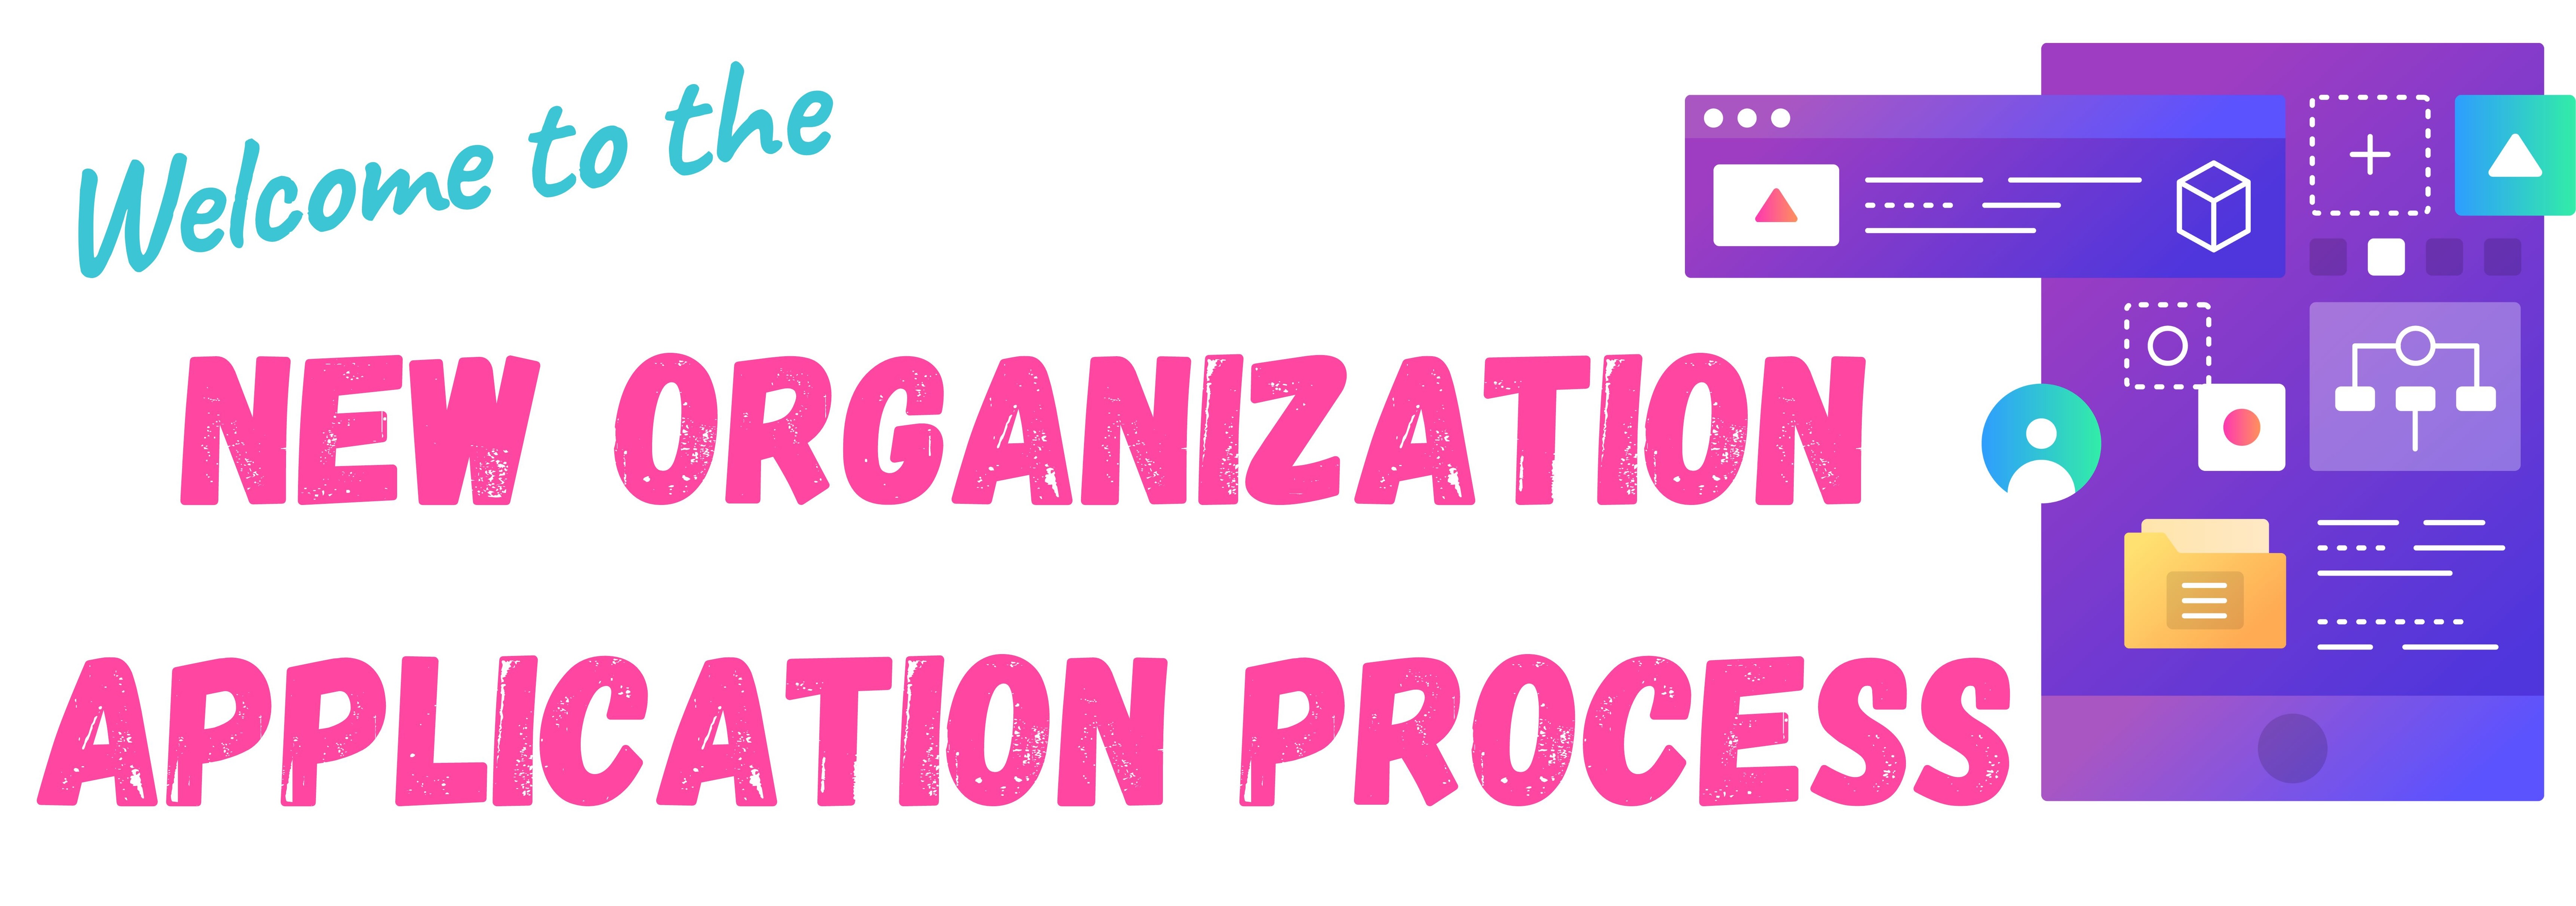 Welcome to the New Organization Application Process